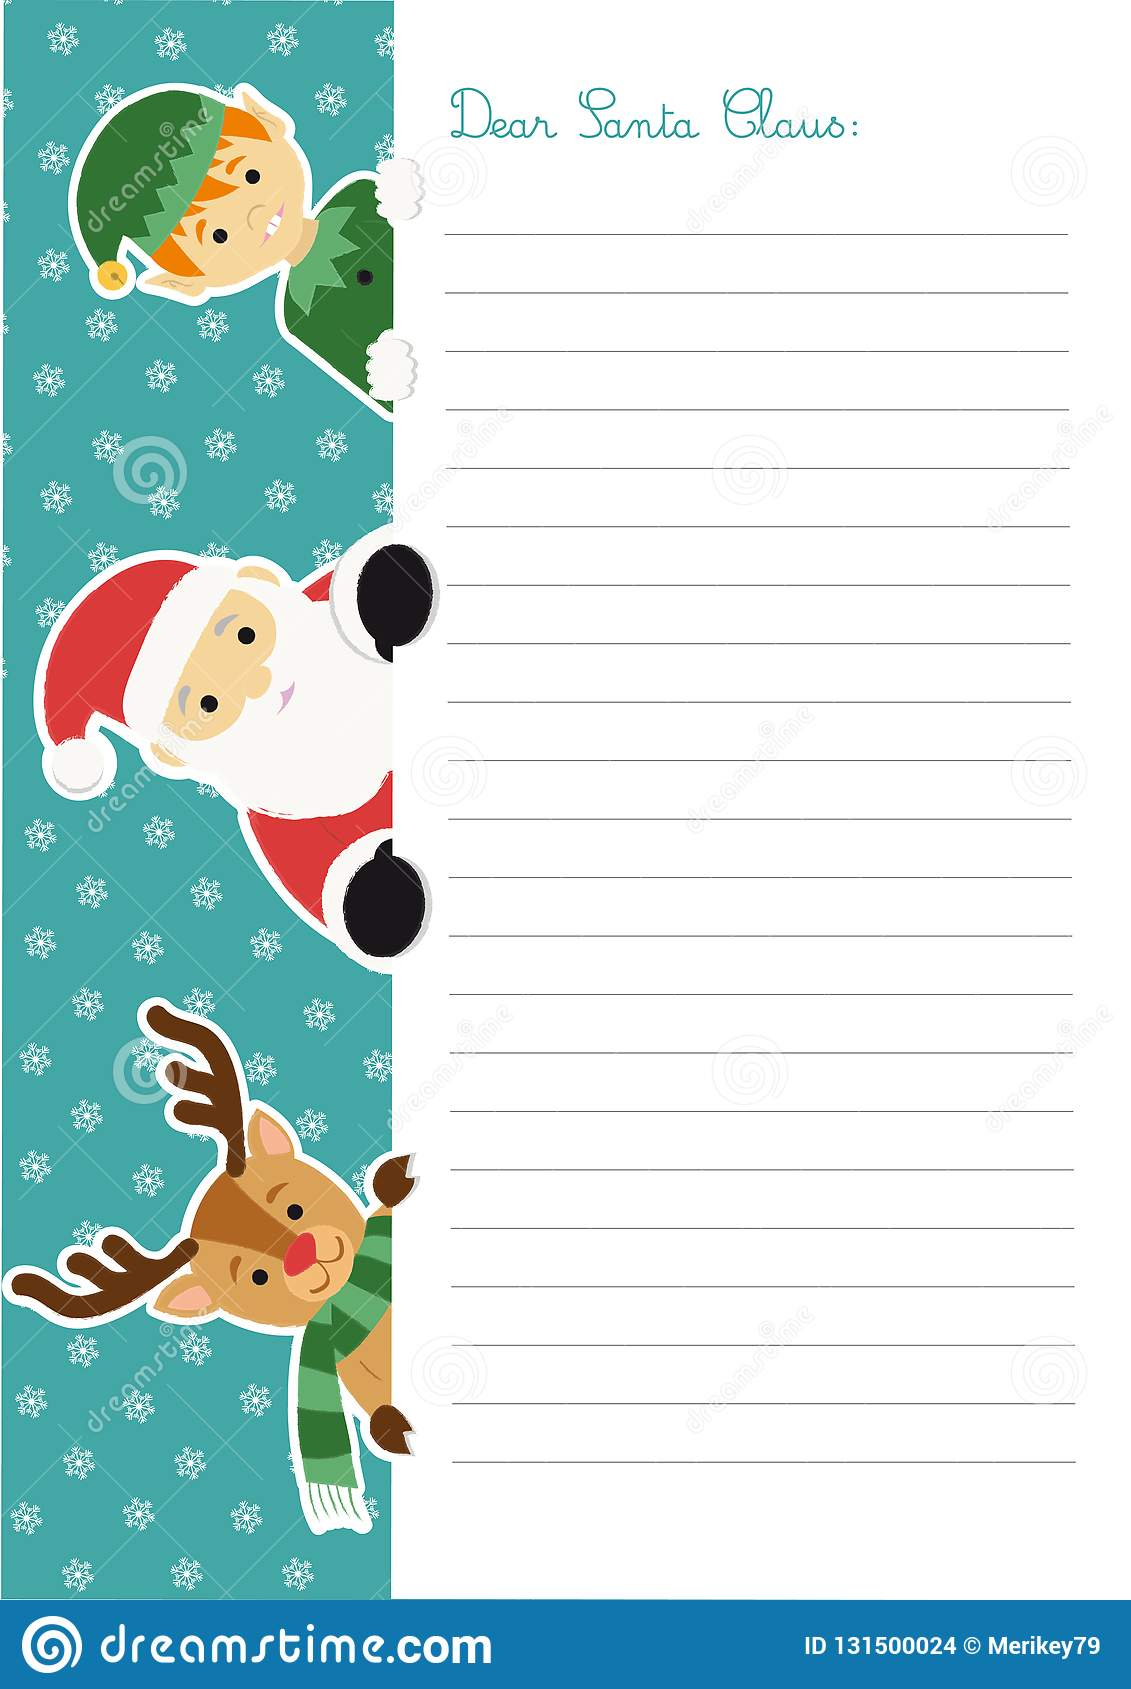 Letter Template To Santa Claus With An Elf And A Reindeer Regarding Letter From Santa Claus Template